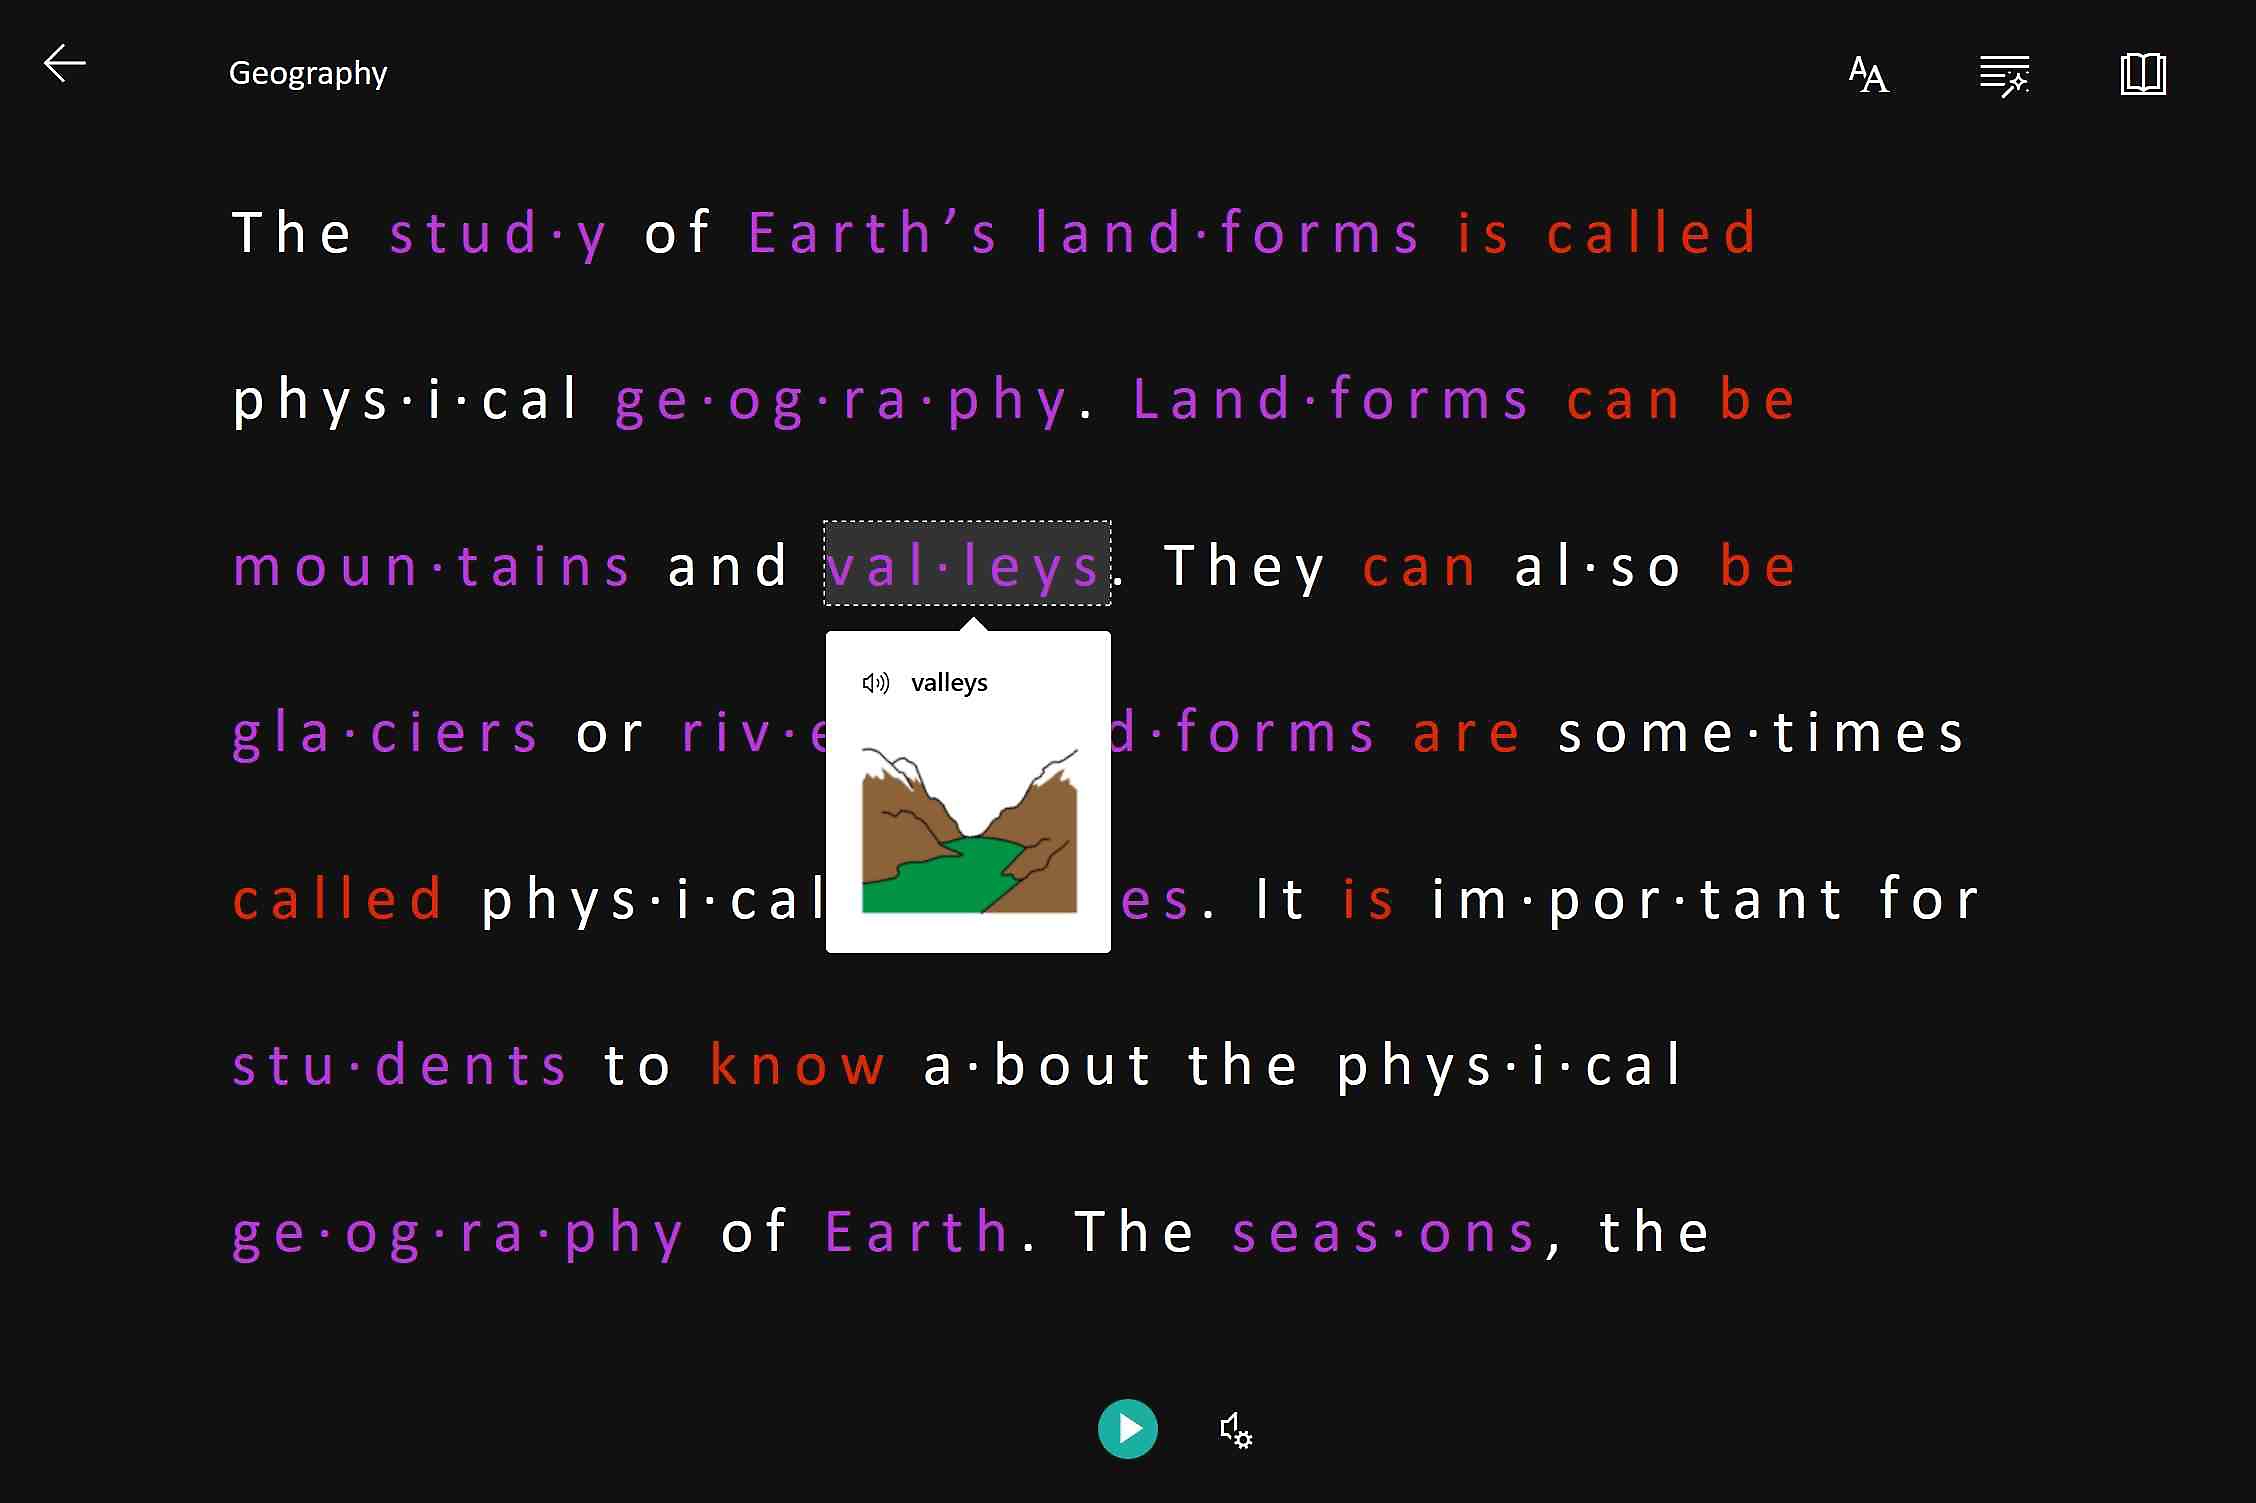 AI Immersive reader highlighting, pronouncing and showing an image for the word Valleys